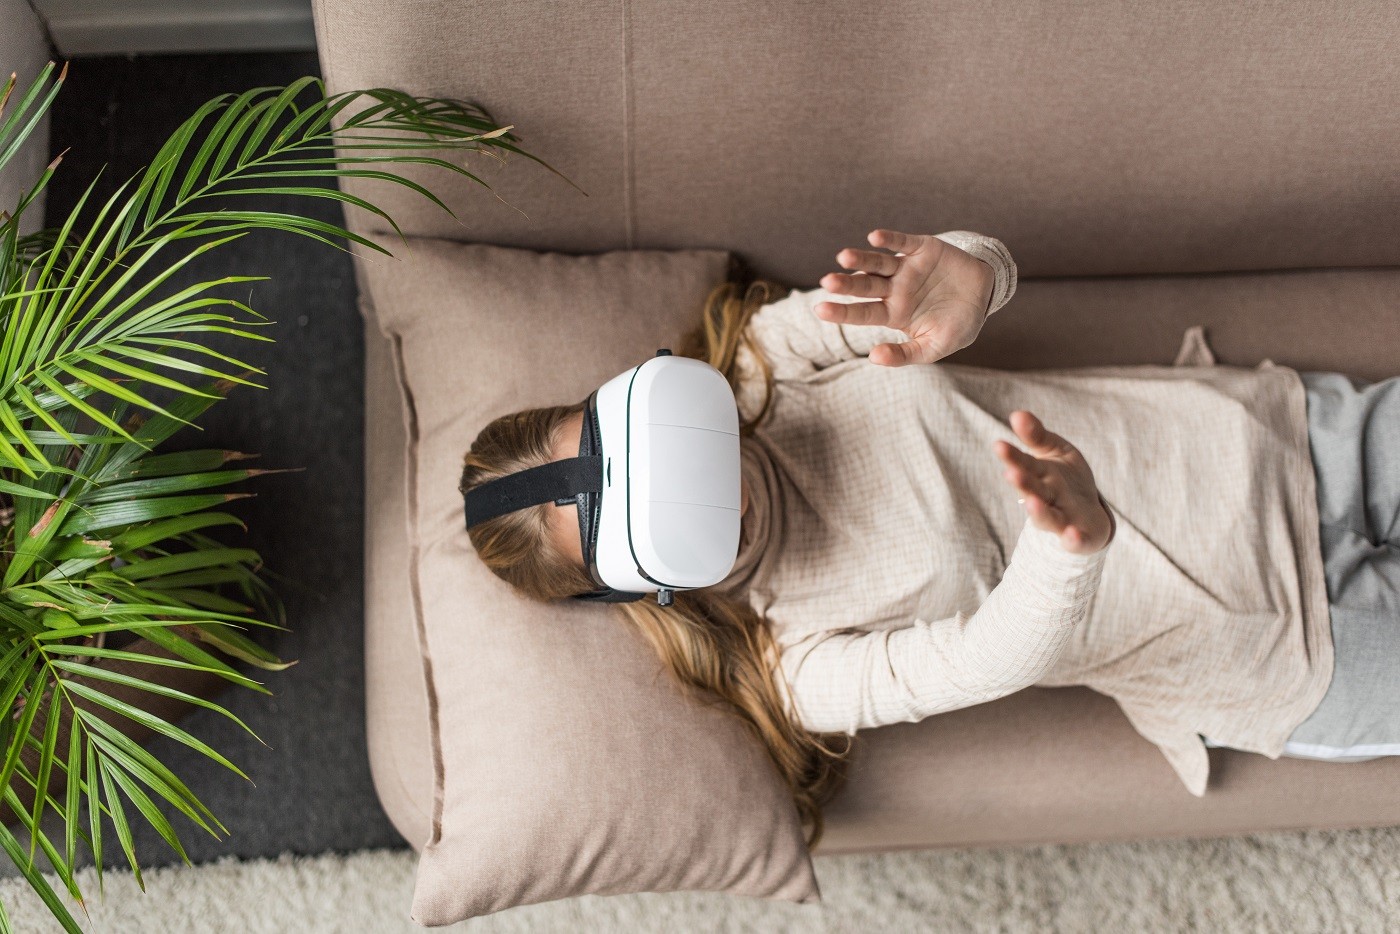 Woman lying on her back on a couch wearing a VR headset. Her hands are in the air as if she is trying to feel something.